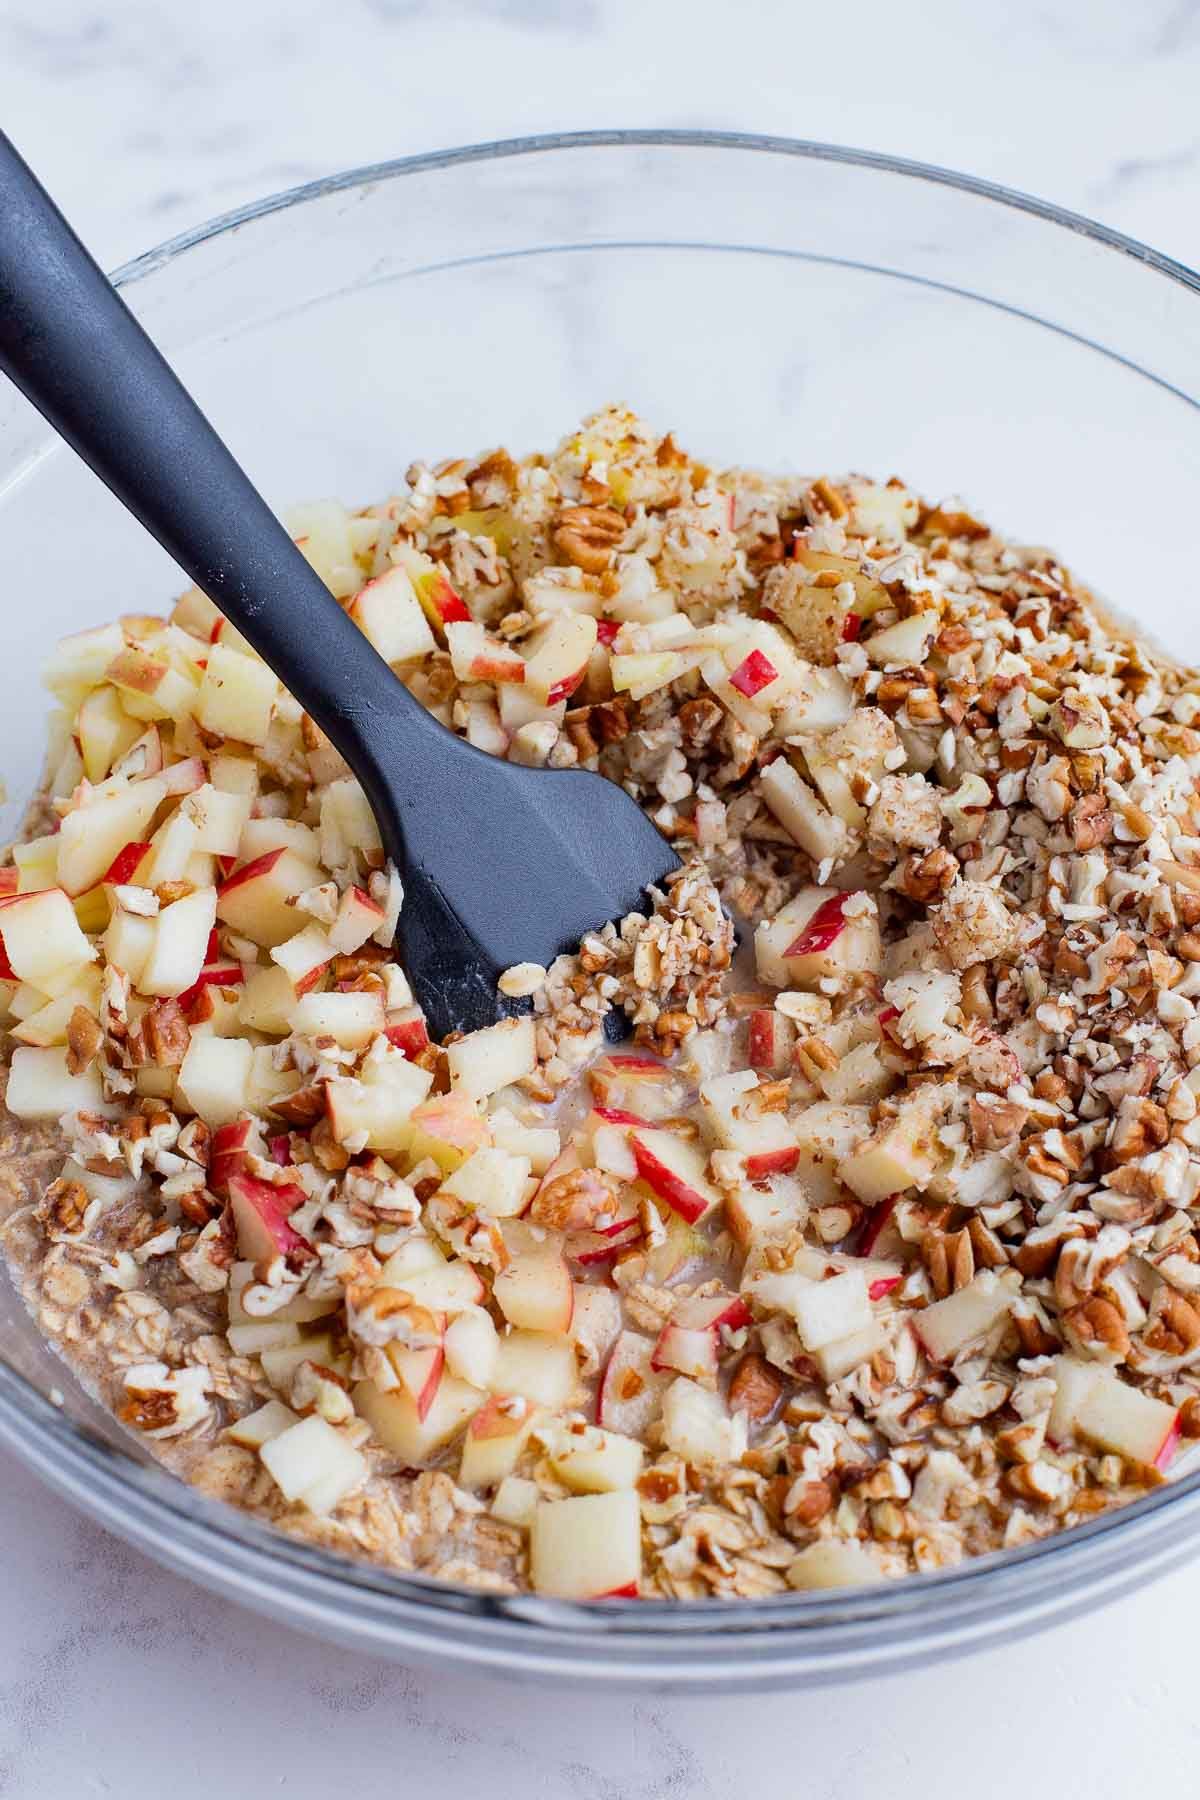 Apples are stirred into the oatmeal mixture.